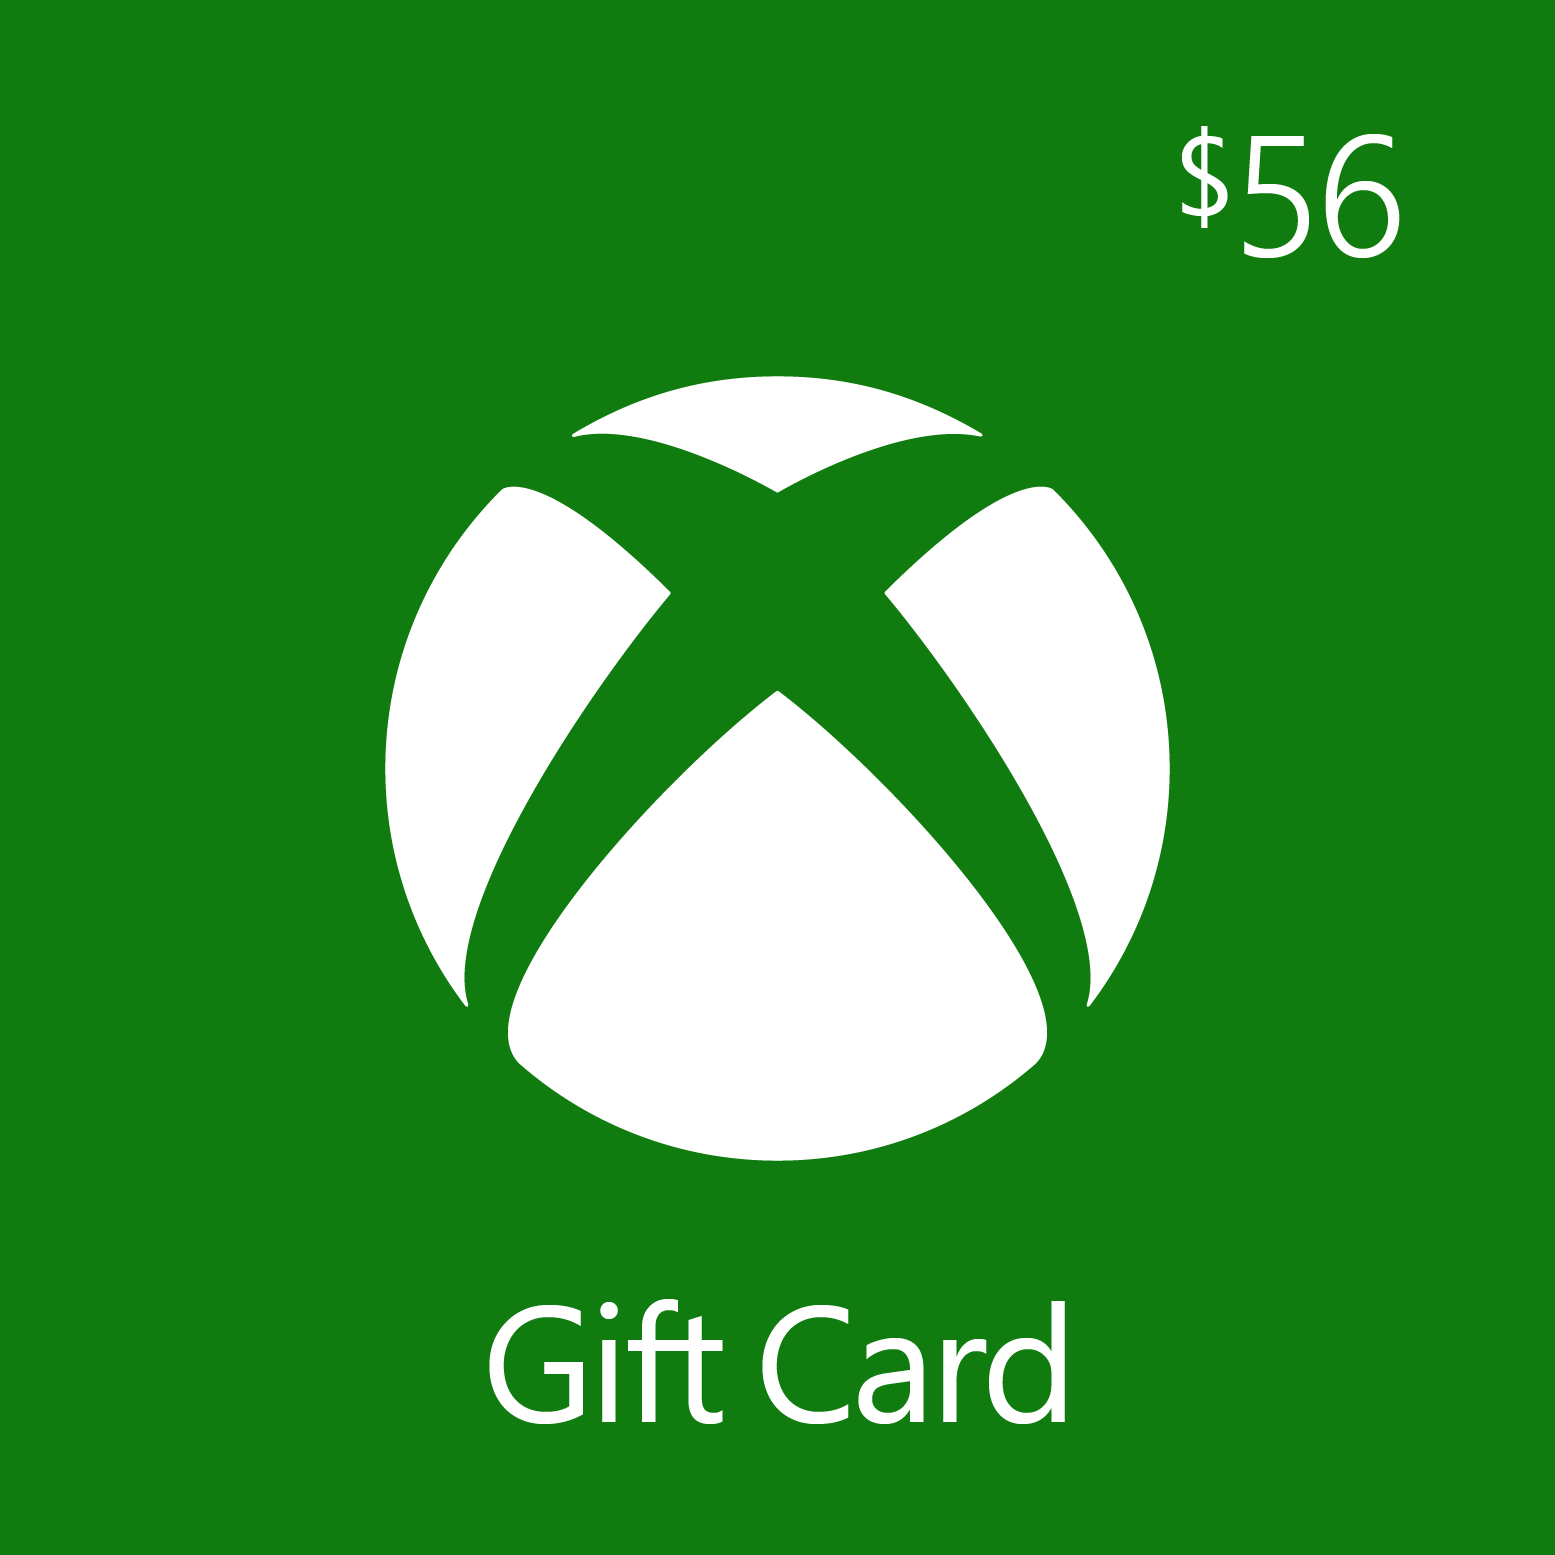 how to buy xbox game pass ultimate with gift card